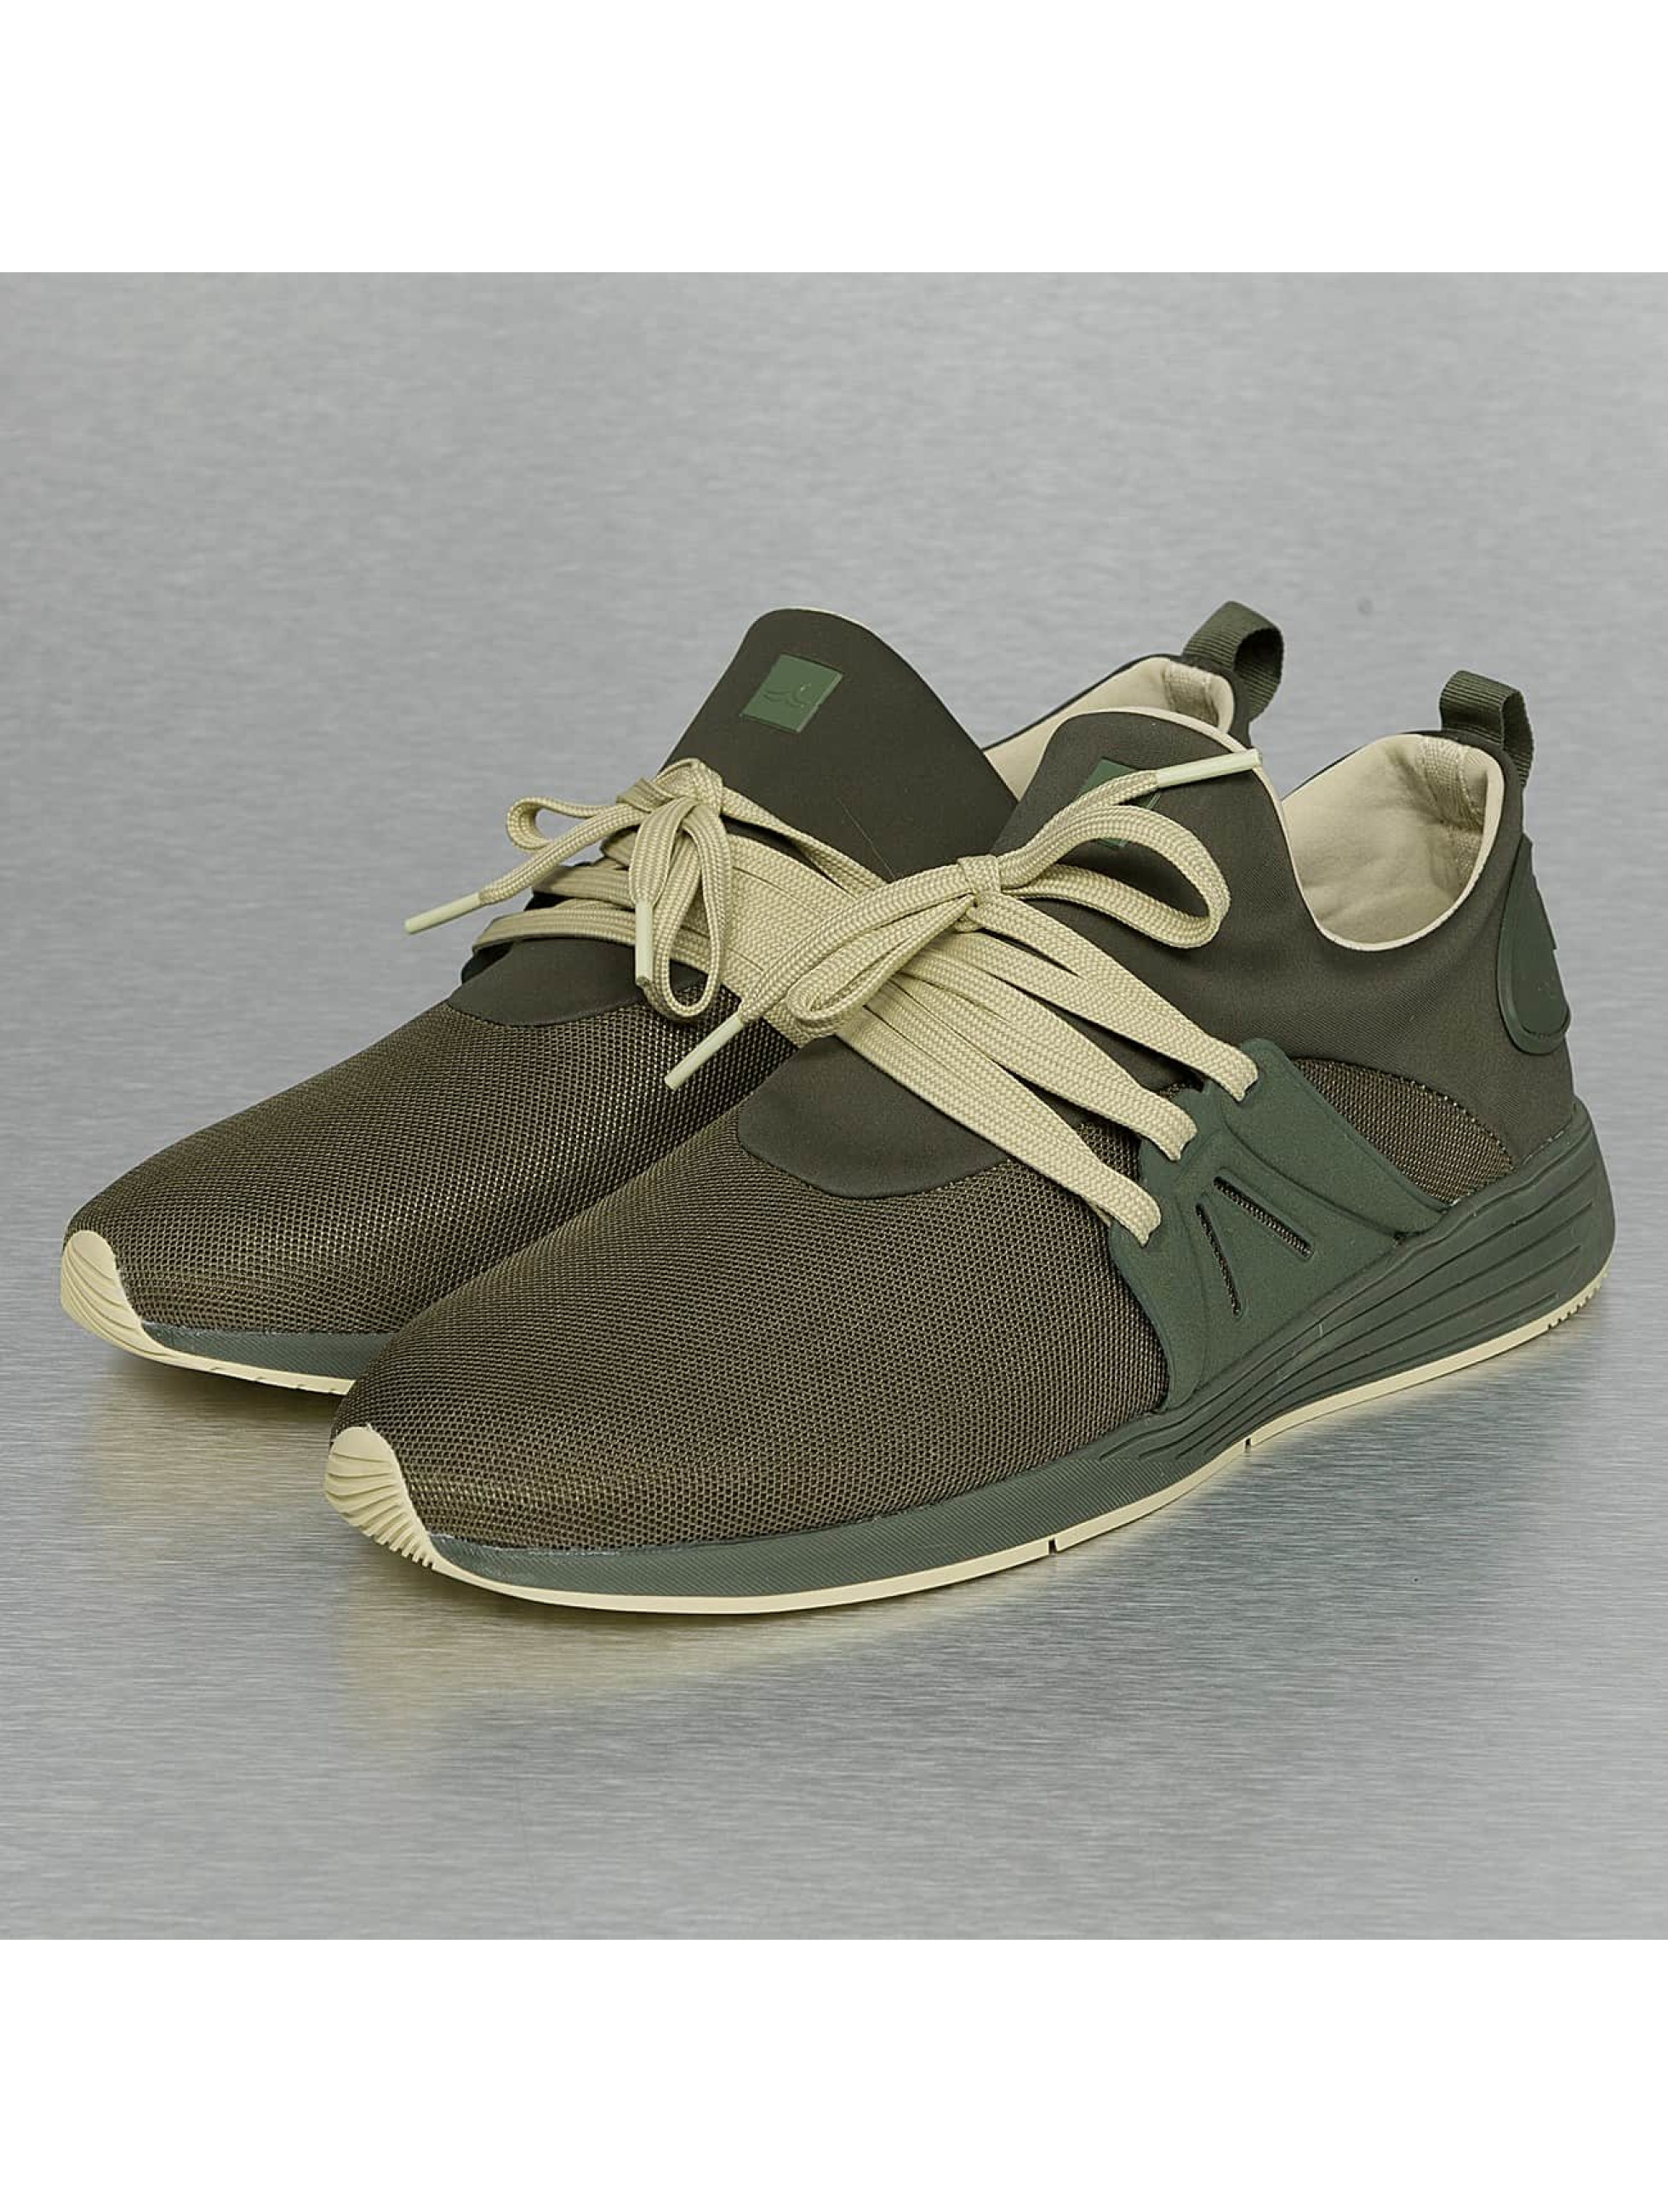 Project Delray Chaussures / Baskets A1A en olive